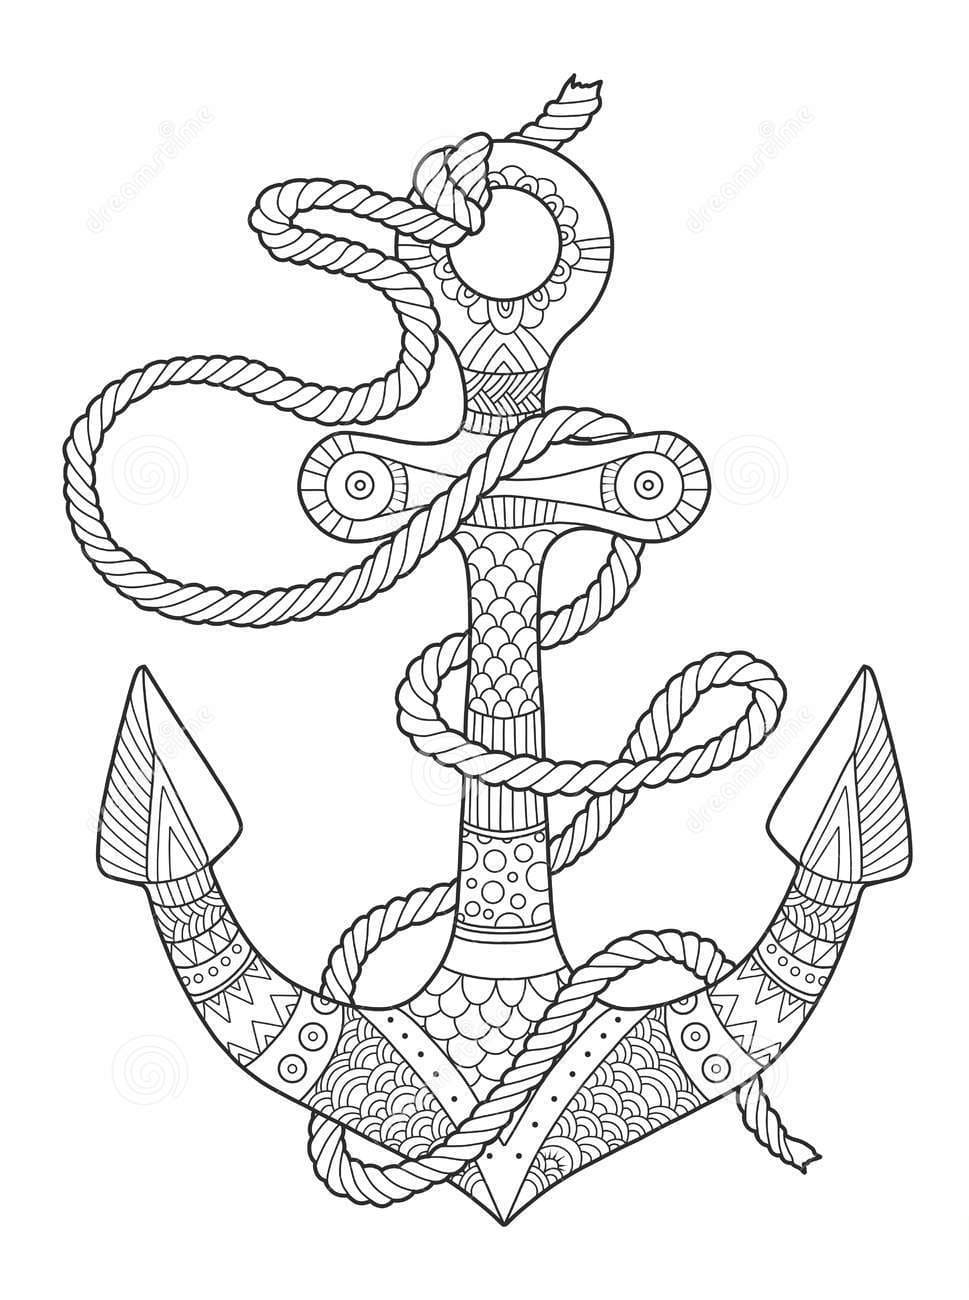 Anchor And Rope Coloring For Kids Coloring Page